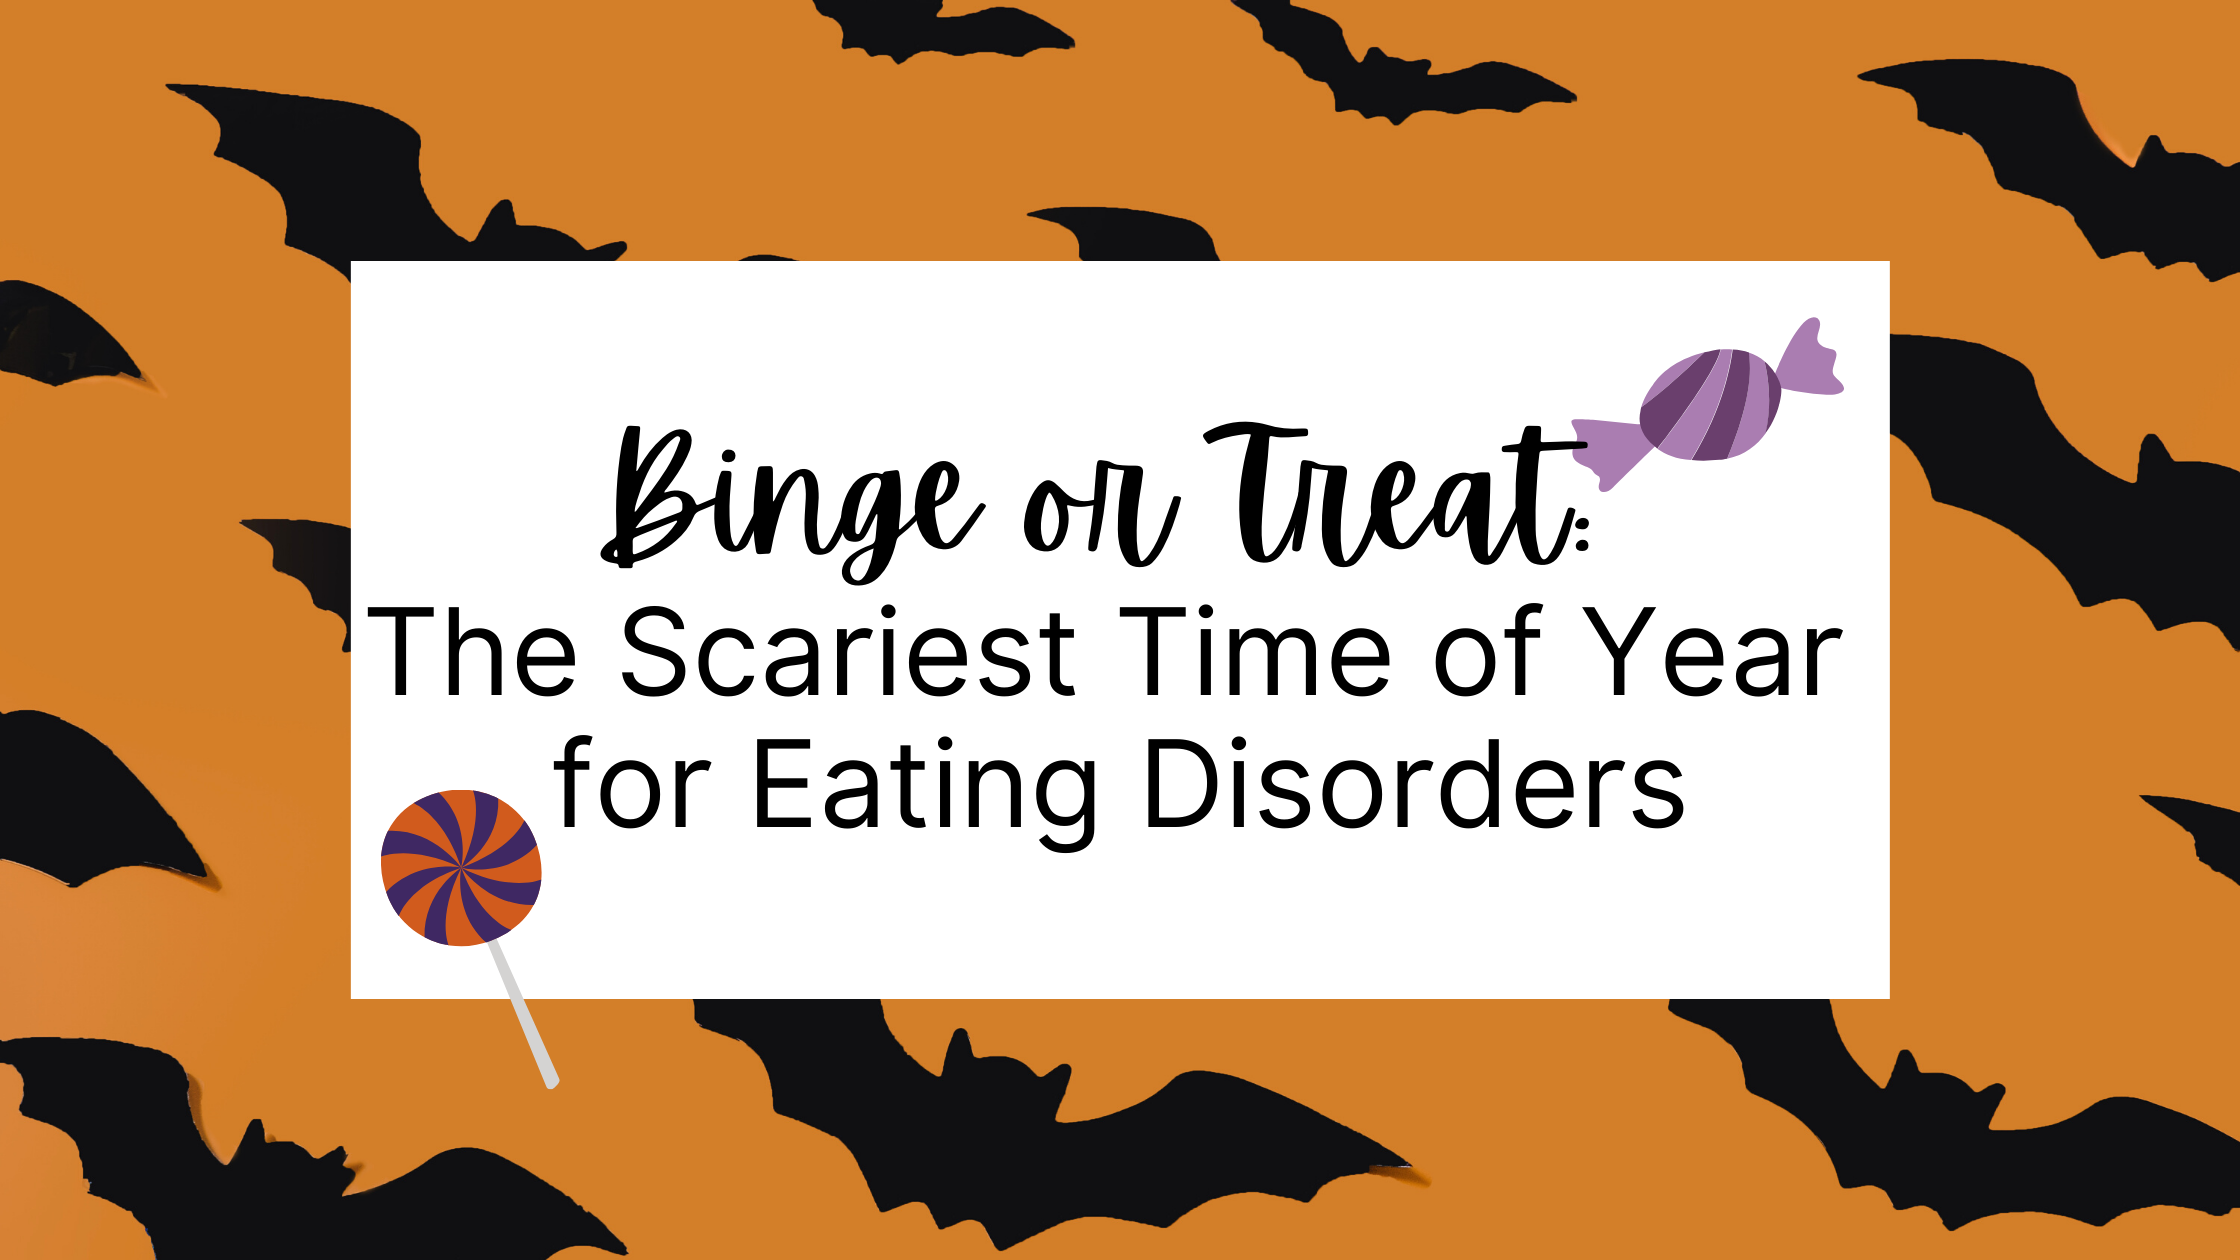 BingeorTreat: Scariest Time for Eating Disorders